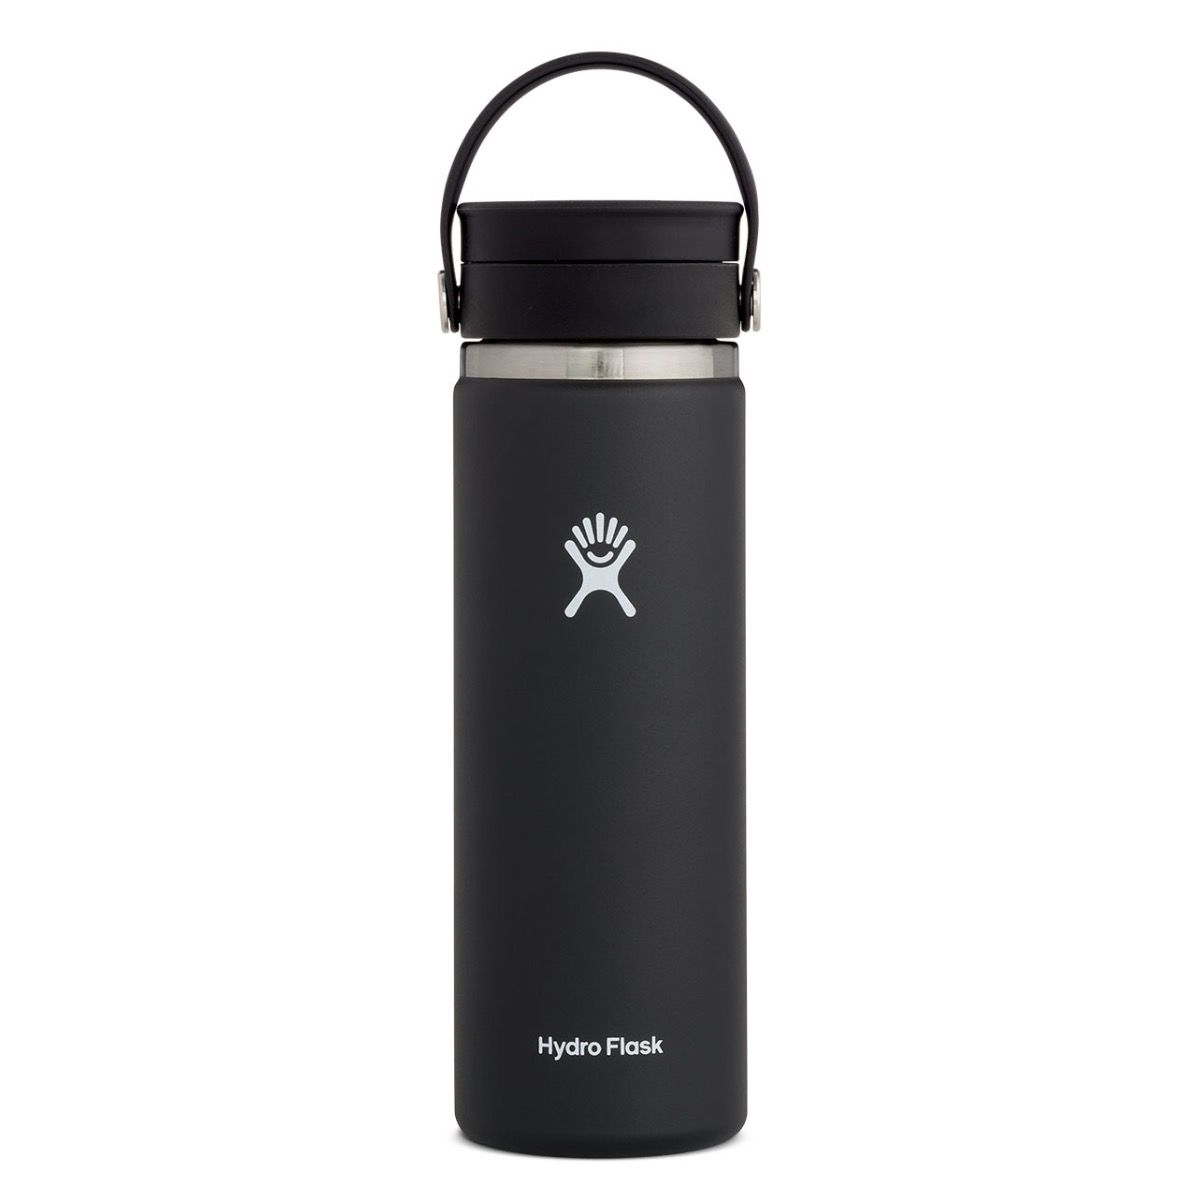 Hydro Flask 20oz Wide Mouth with Flex Sip Lid Accessories Hydro Flask Black-001  